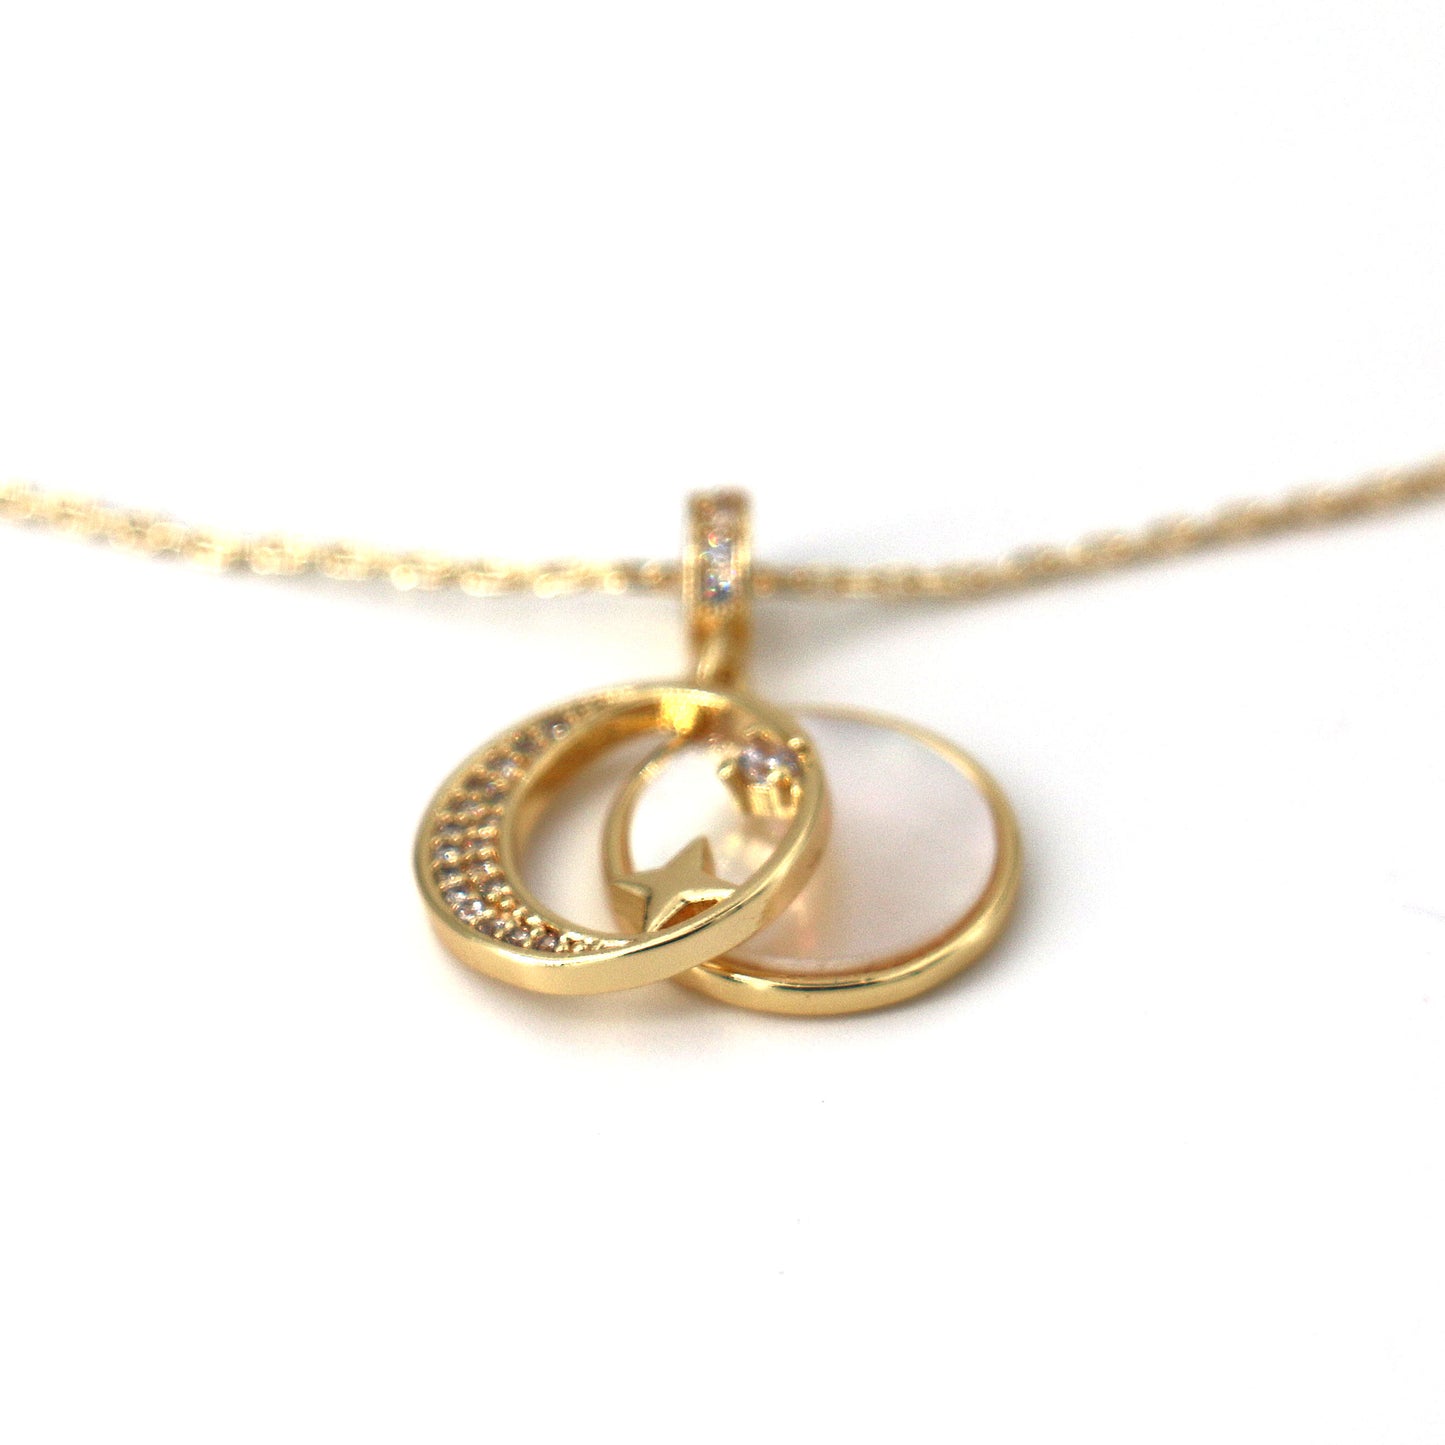 Fashion Moon necklace